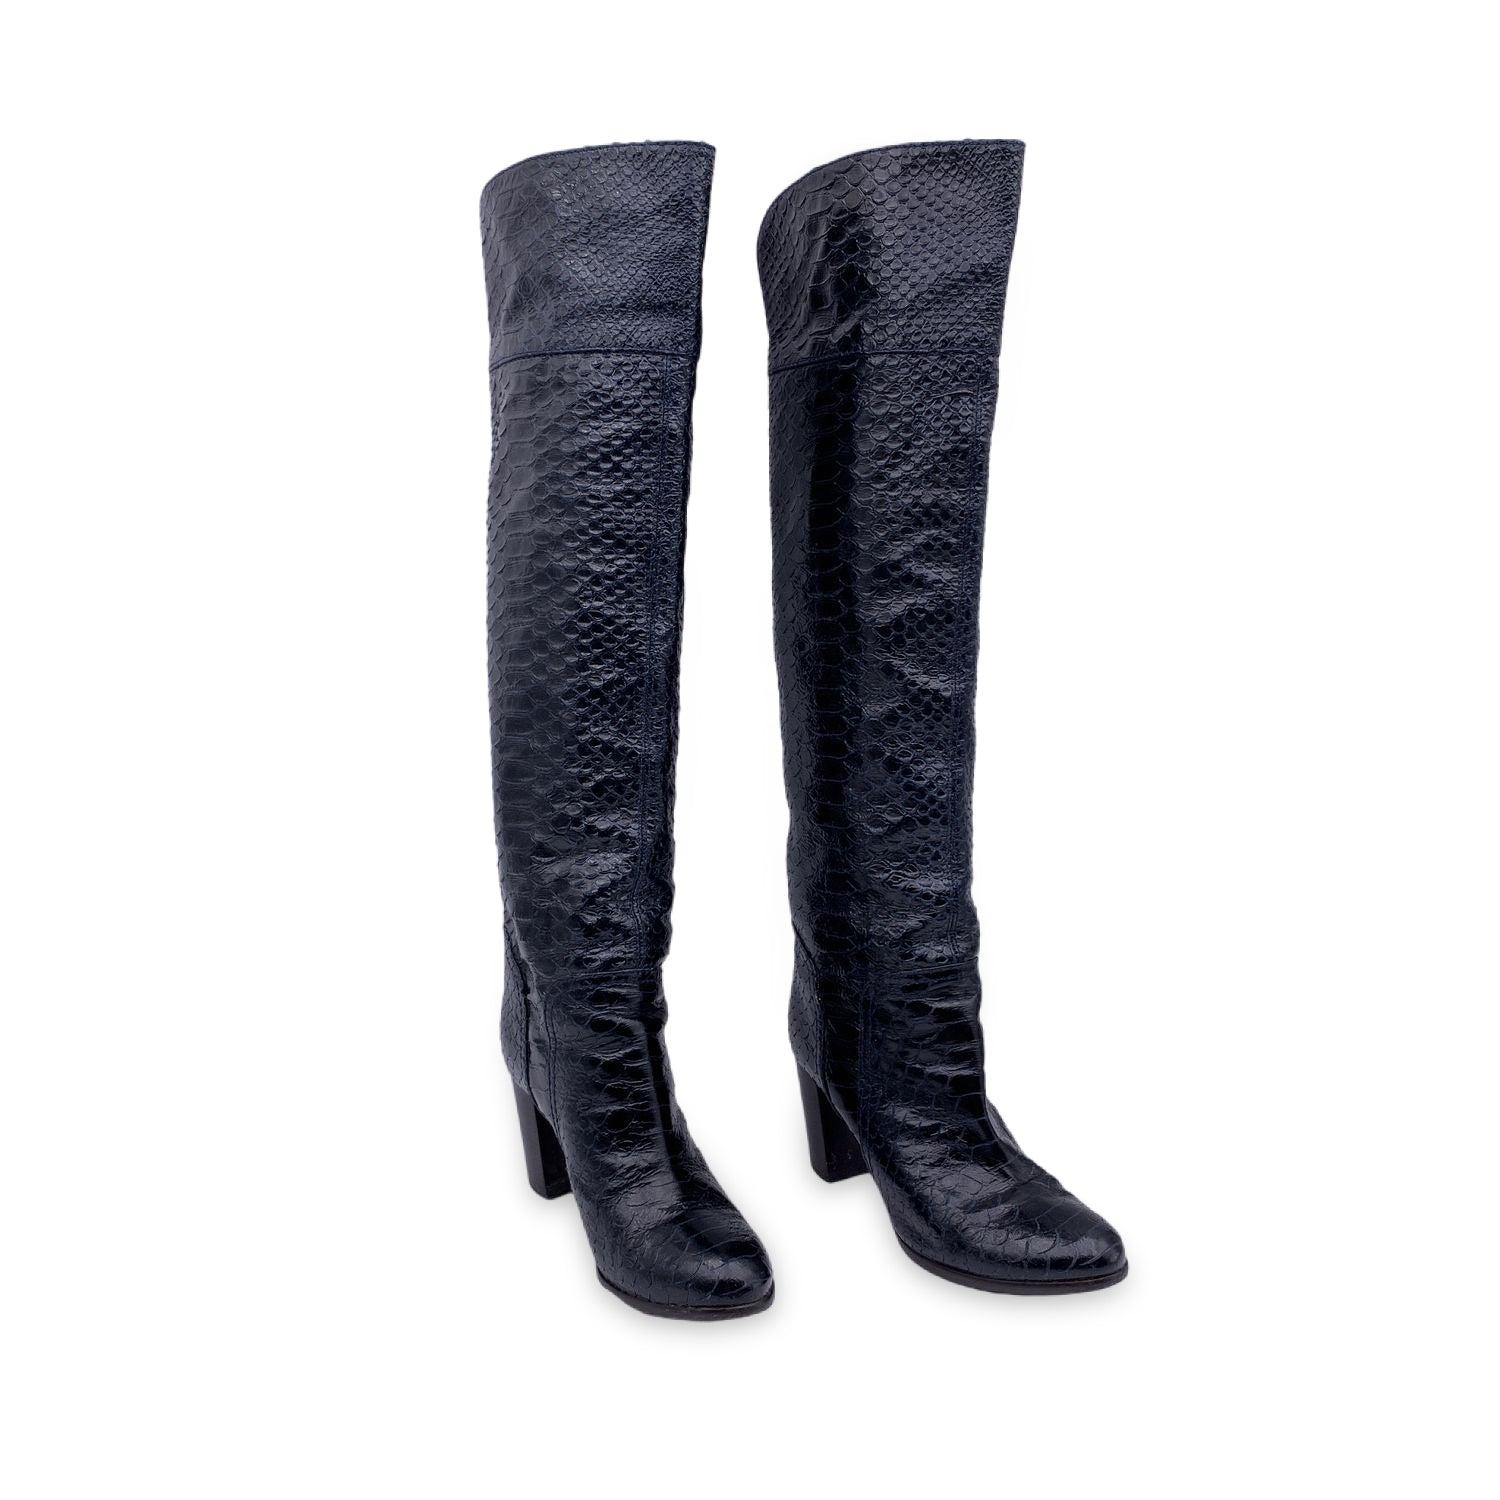 Sergio Rossi blue leather knee length boot. They feature a round toe design and 9 cm heels. Heels height: 7.5 cm. Size: EU 36 (The size shown for this item is the size indicated by the designer on the shoes). Made in Italy. Details MATERIAL: Leather